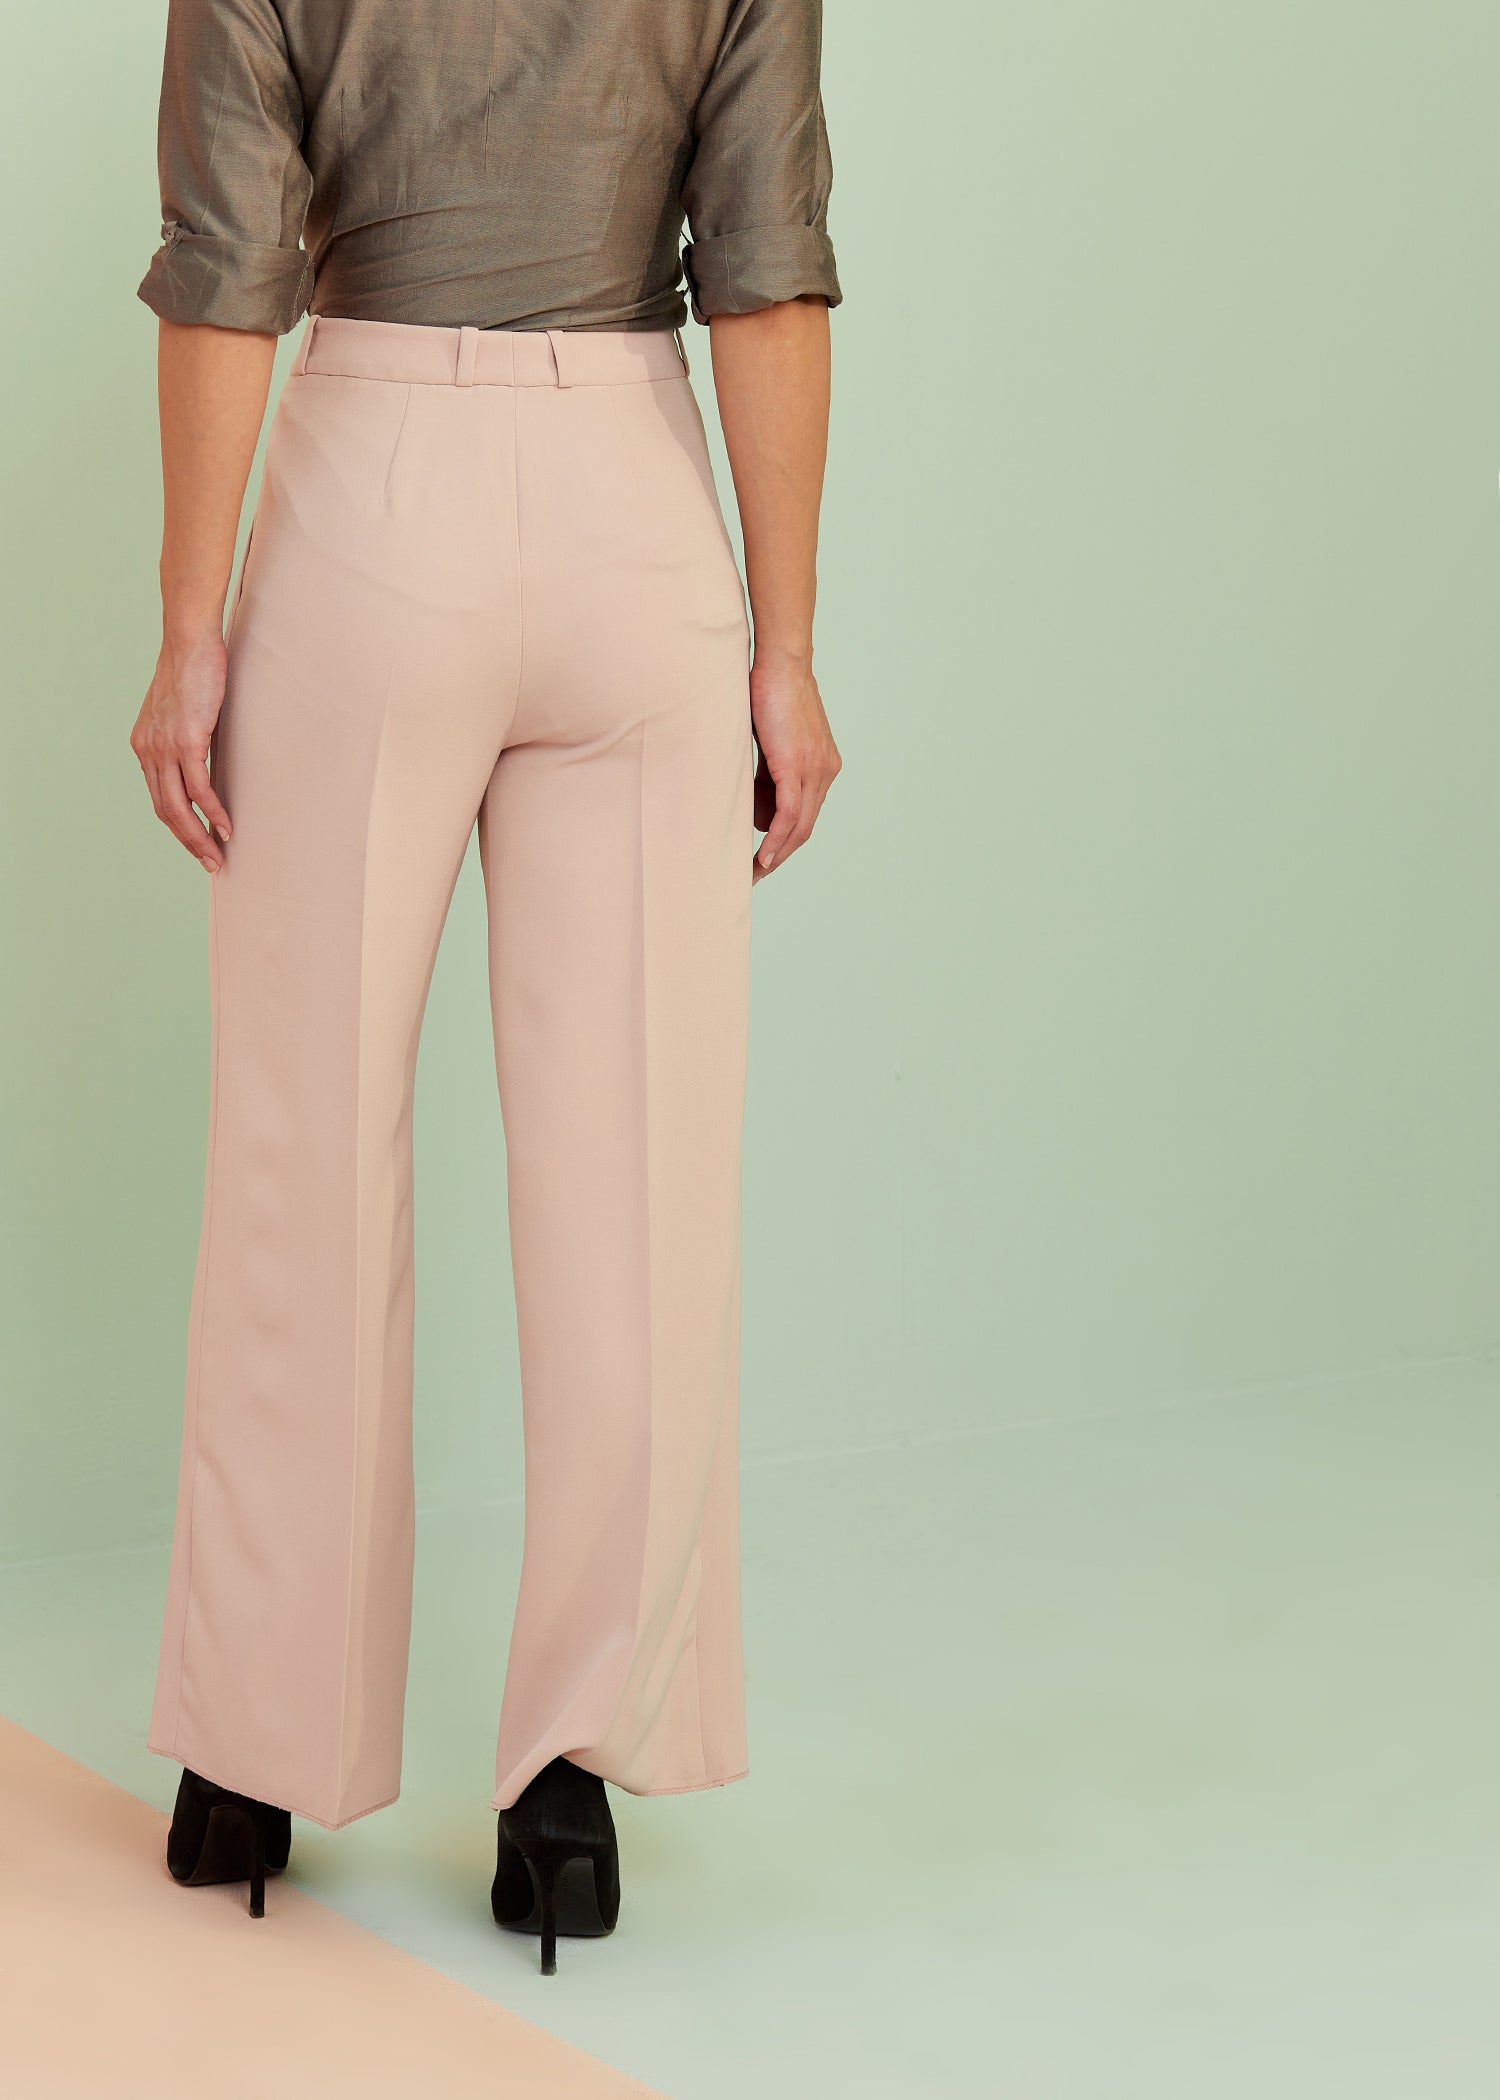 Dusty Pink Flared Pants